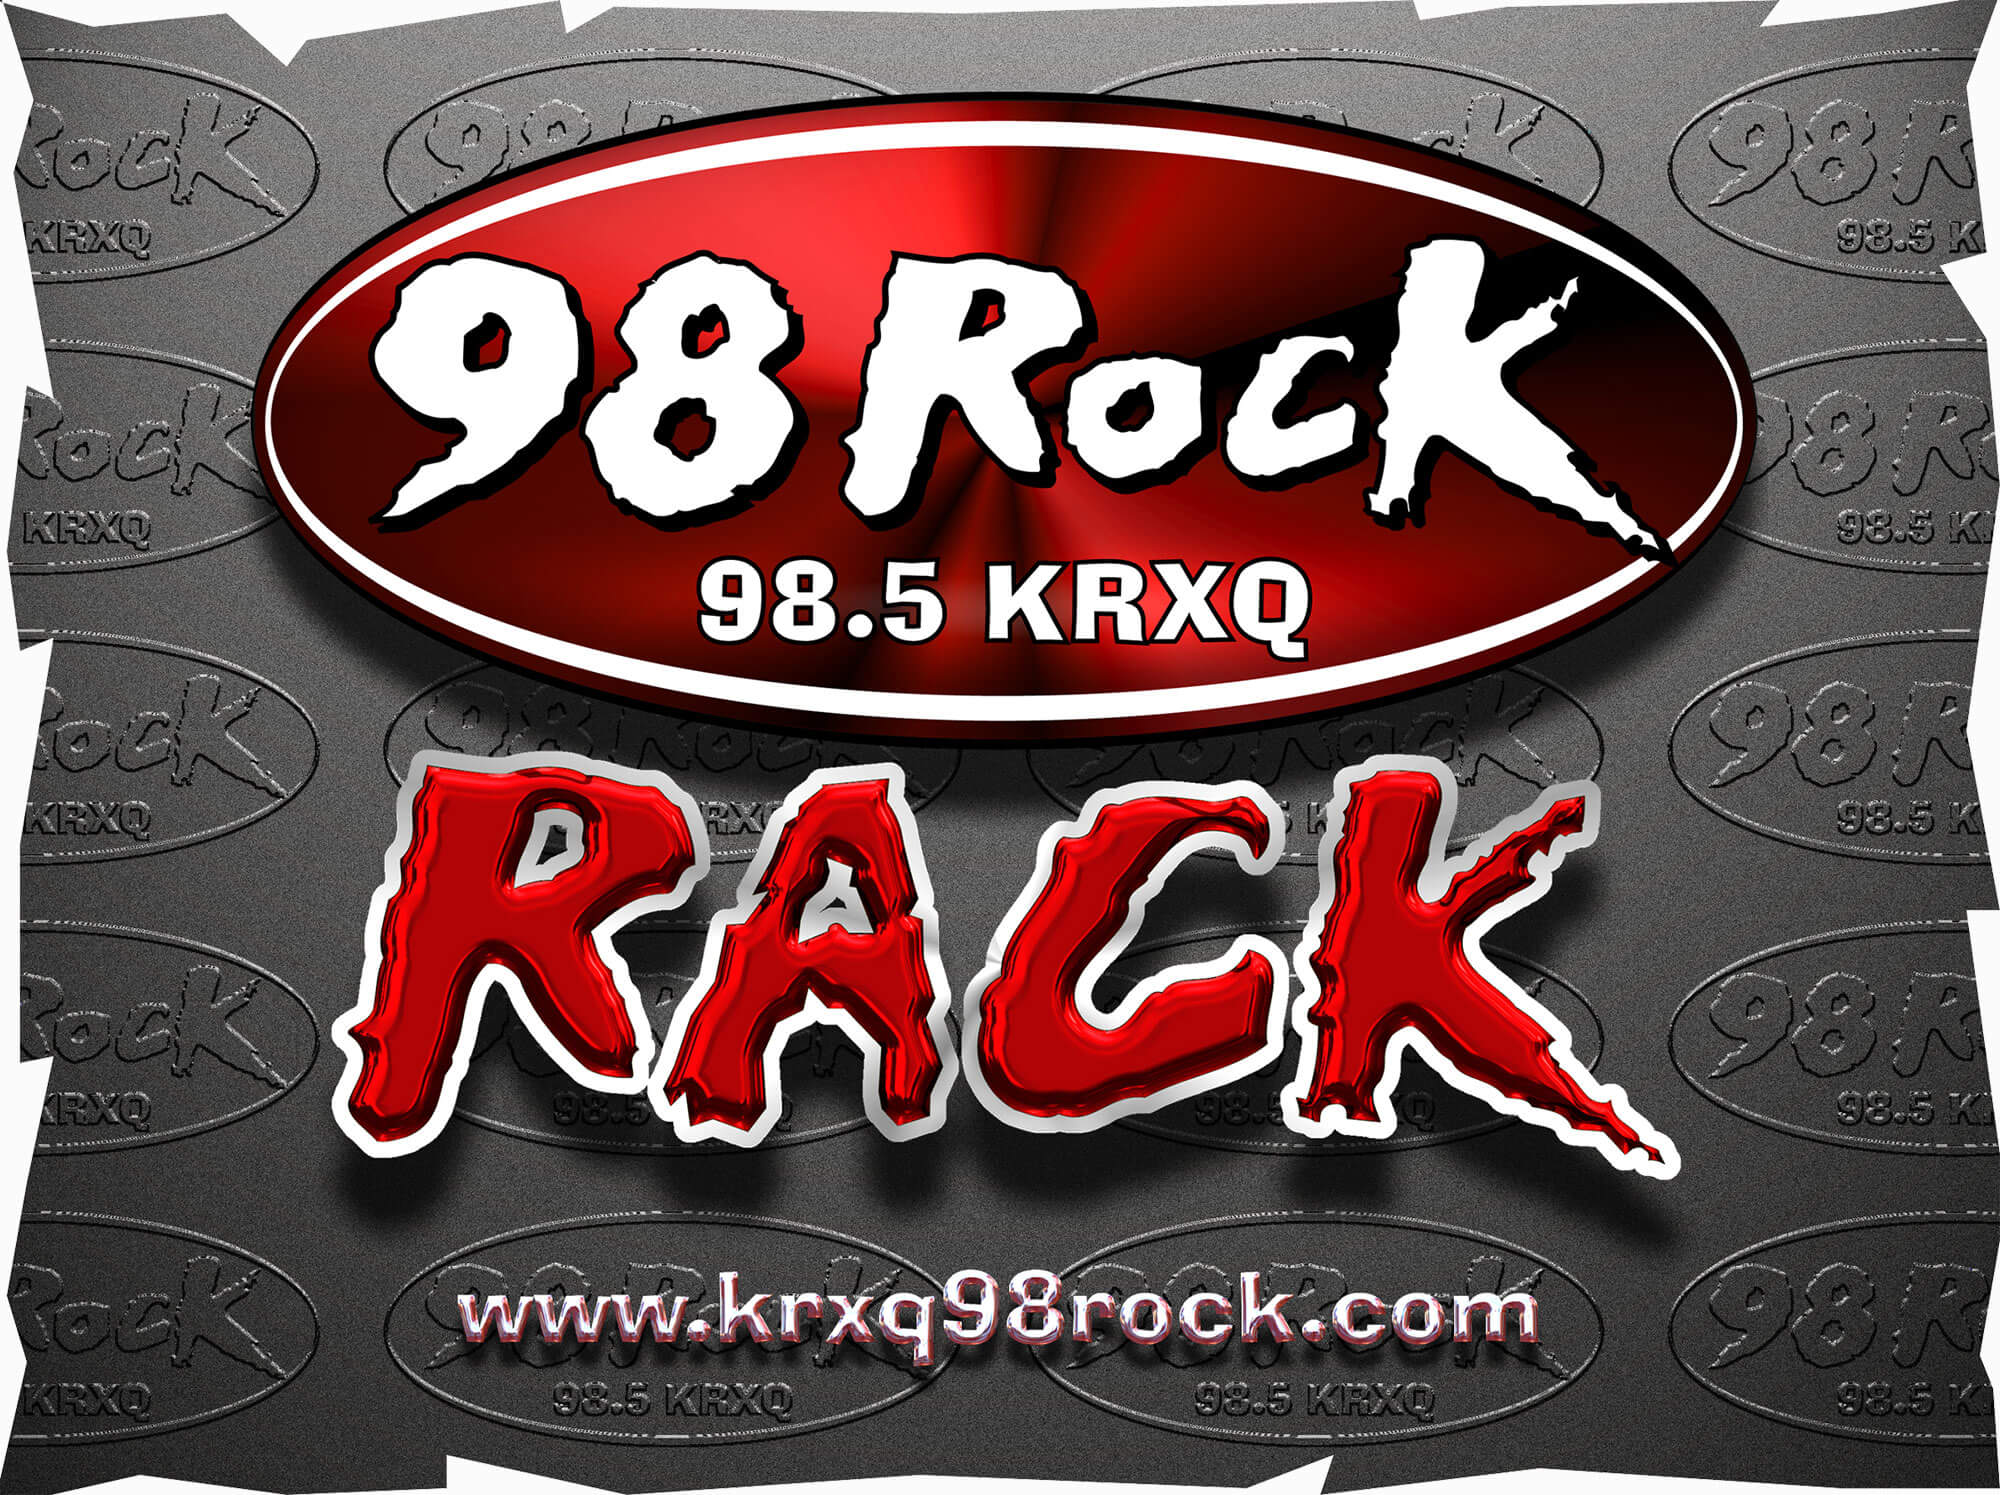 98 Rock Rack In-Store Promotional Graphic